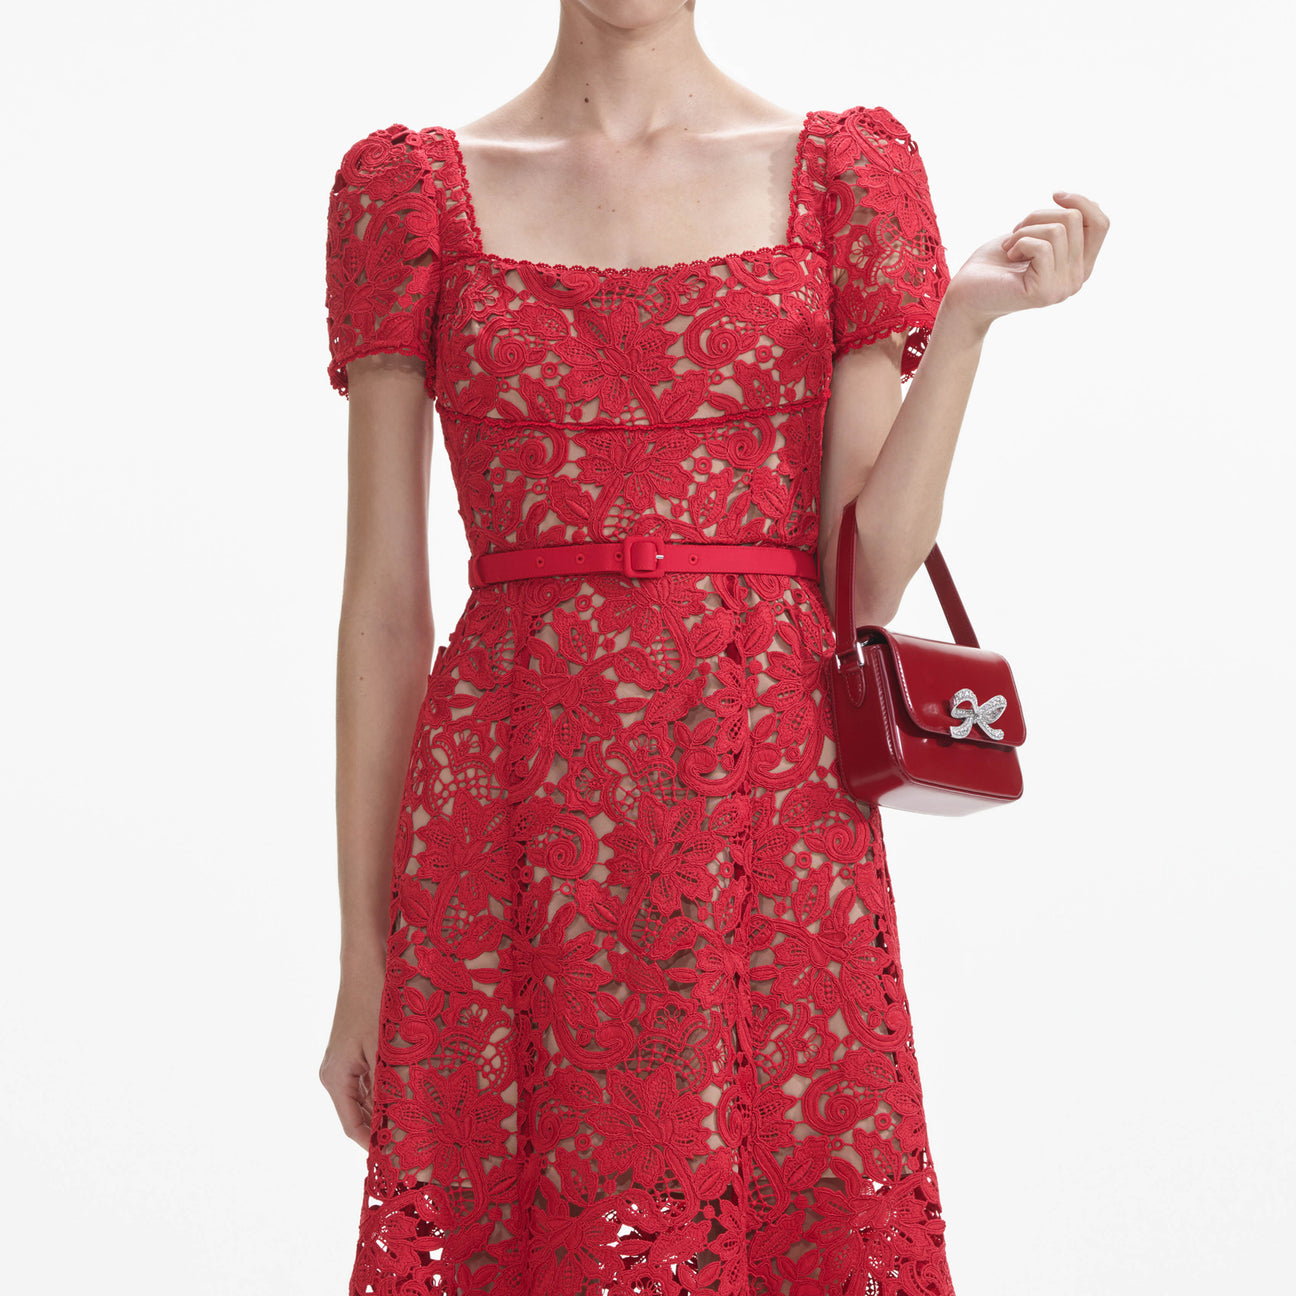 SP Red Floral Lace Midi Dress